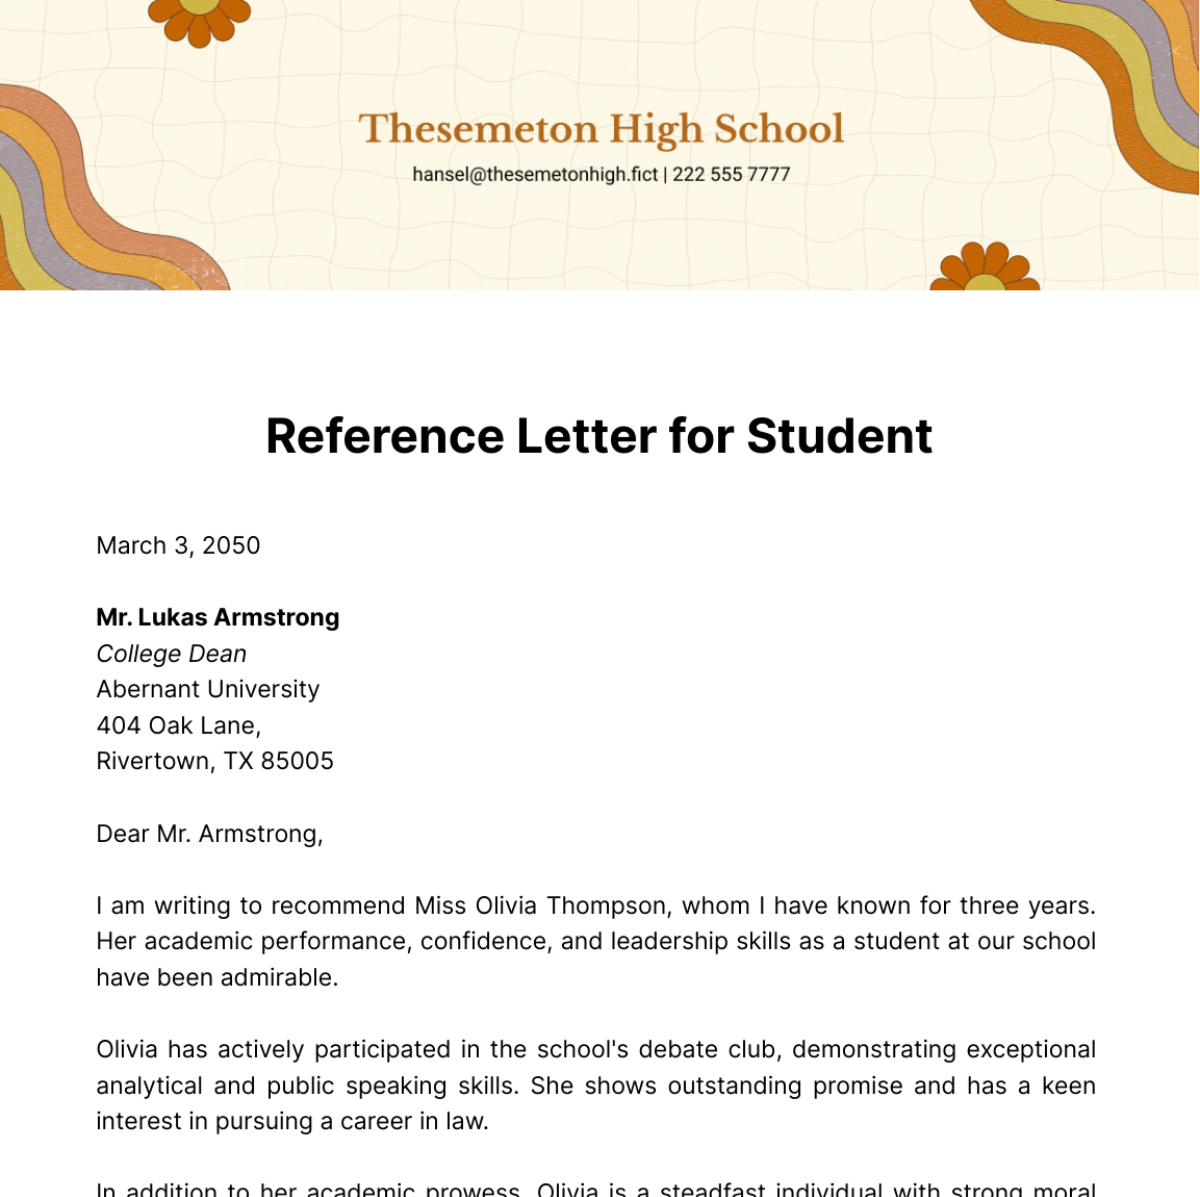 Reference Letter for Student Template